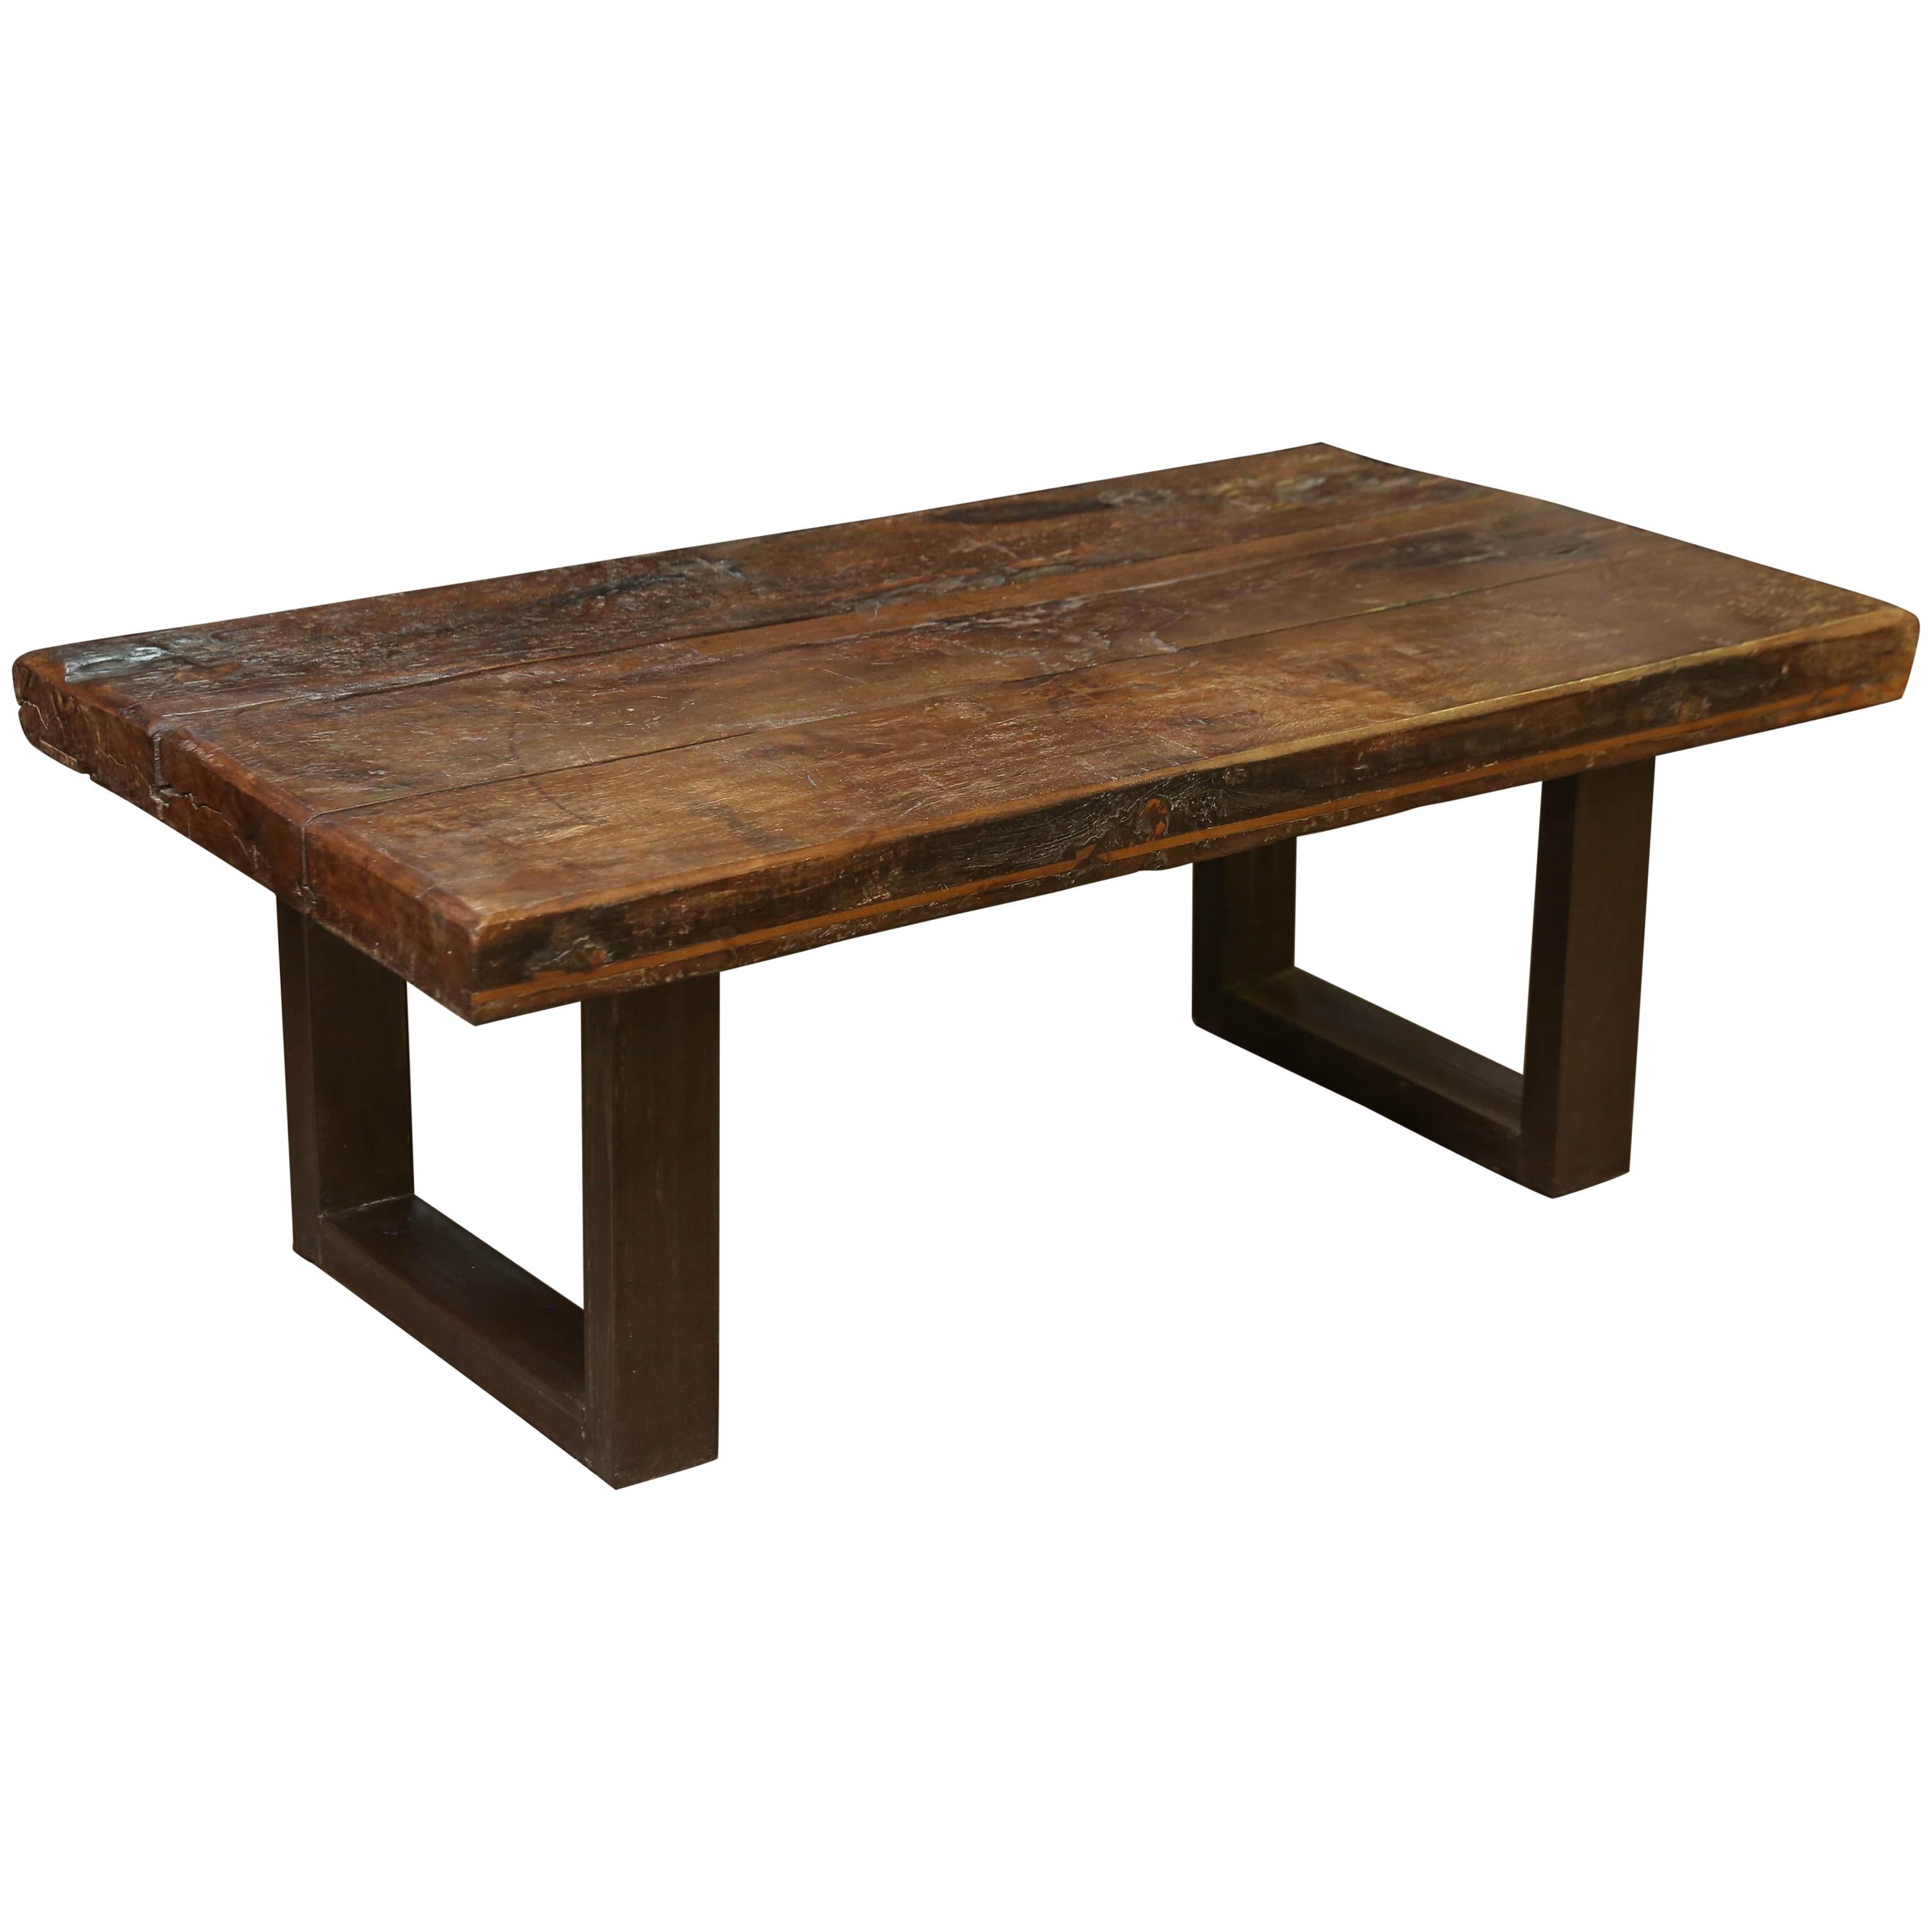 1810s Solid Thick Teak Wood Coffee Table from a Game Santuary in Assam For Sale